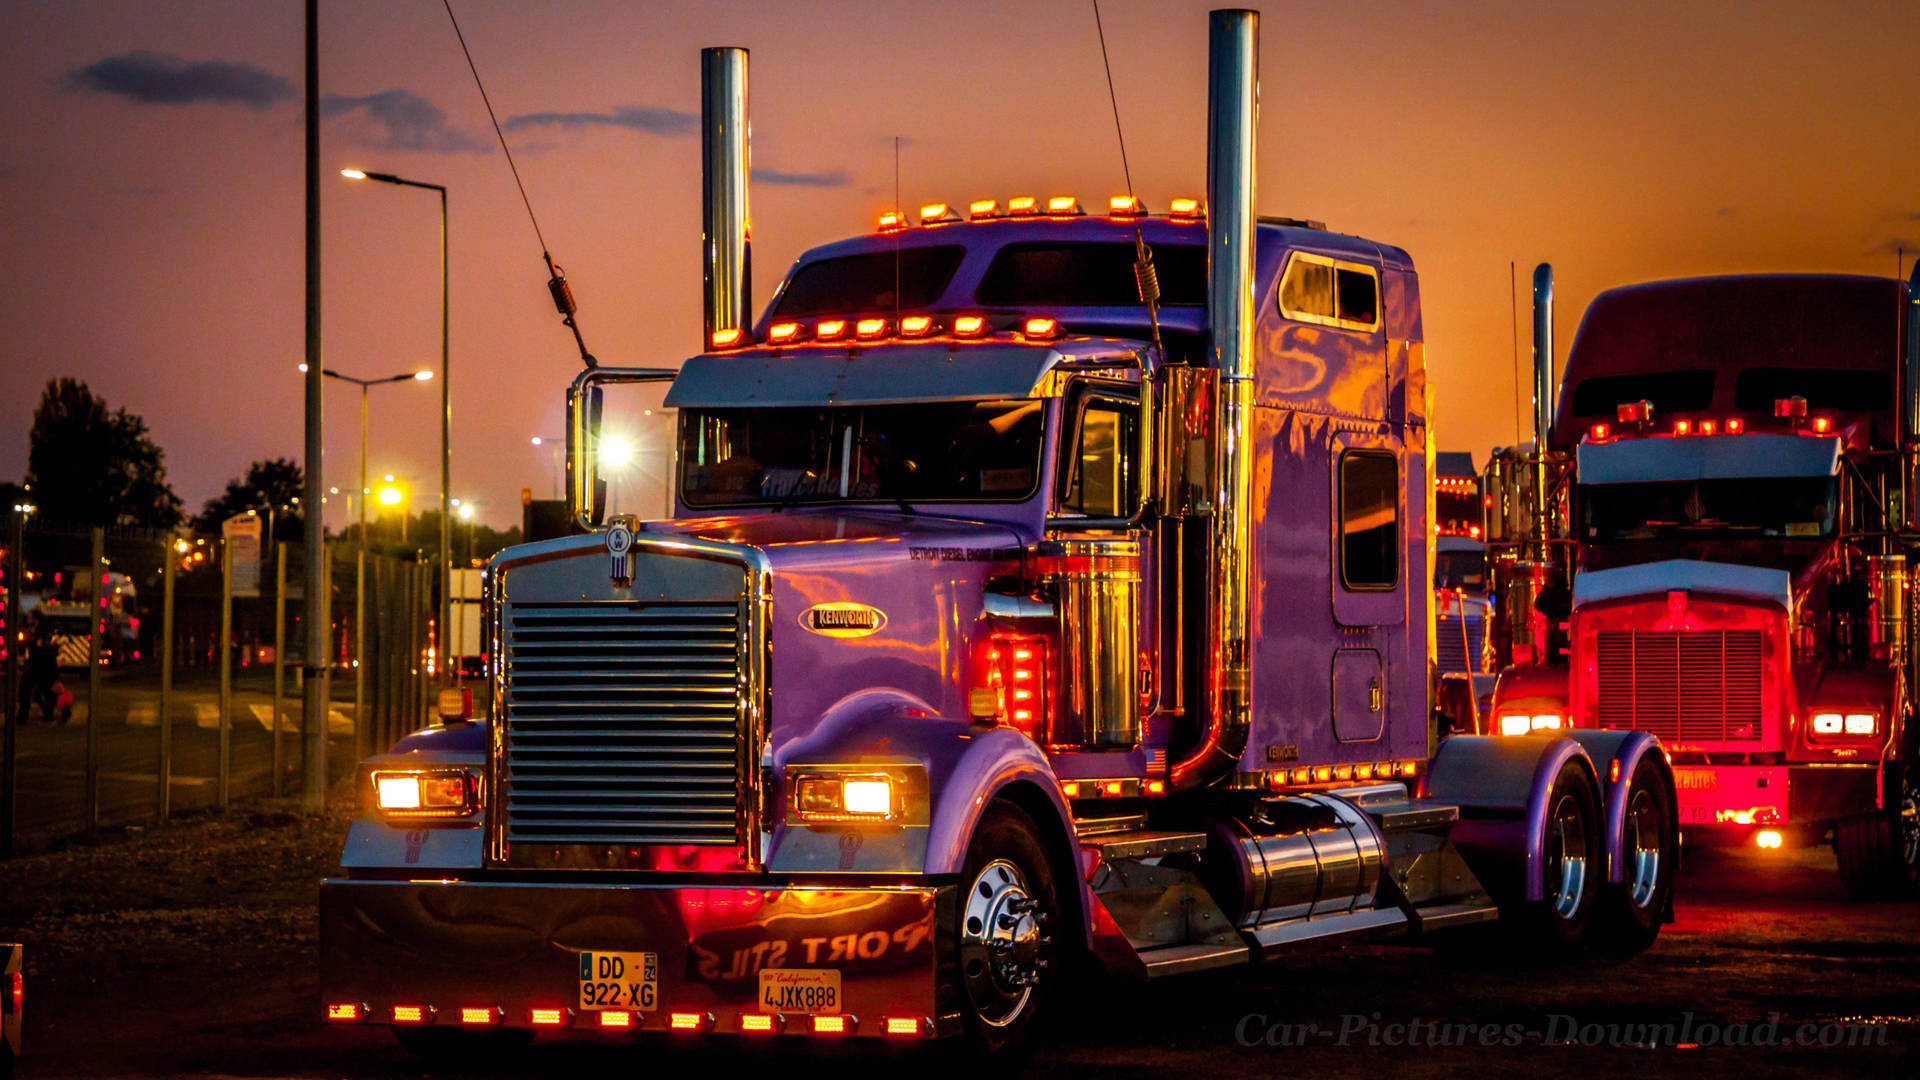 Colorful Cool Truck At Night